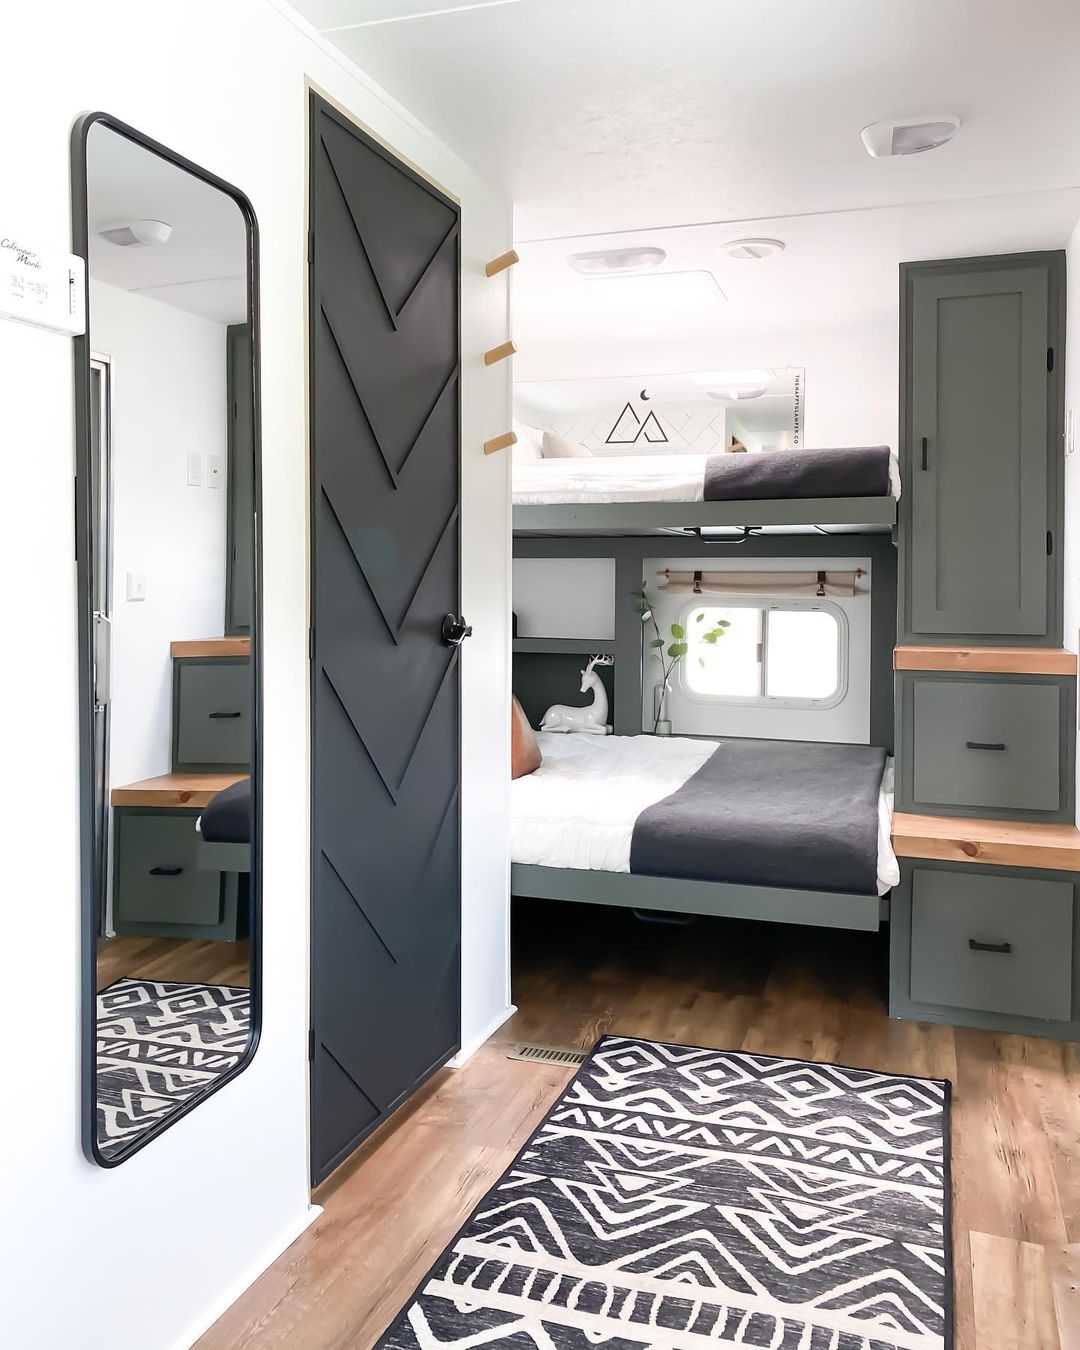 https://www.extraspace.com/blog/wp-content/uploads/2021/06/Put-Storage-Cabinets-in-the-Bedroom.jpeg